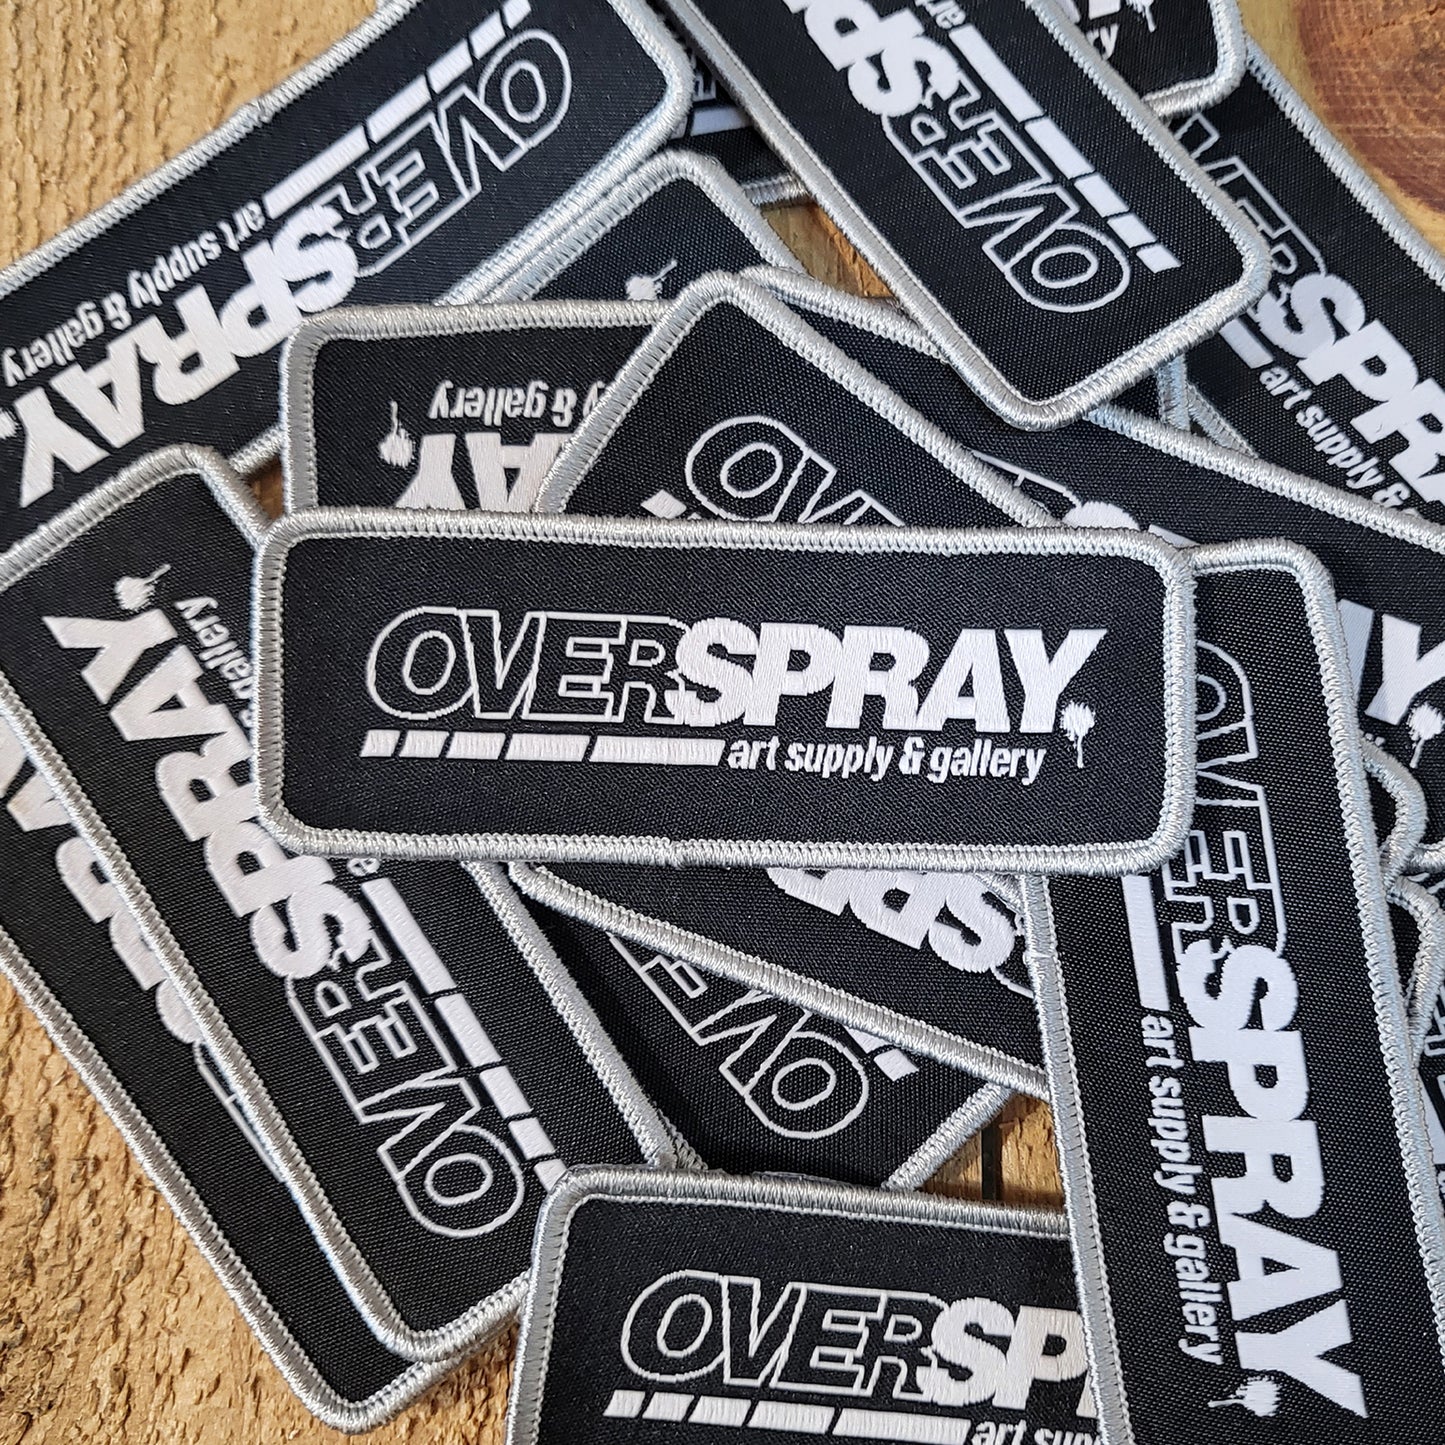 overspray logo patch in black and white with a silver frame